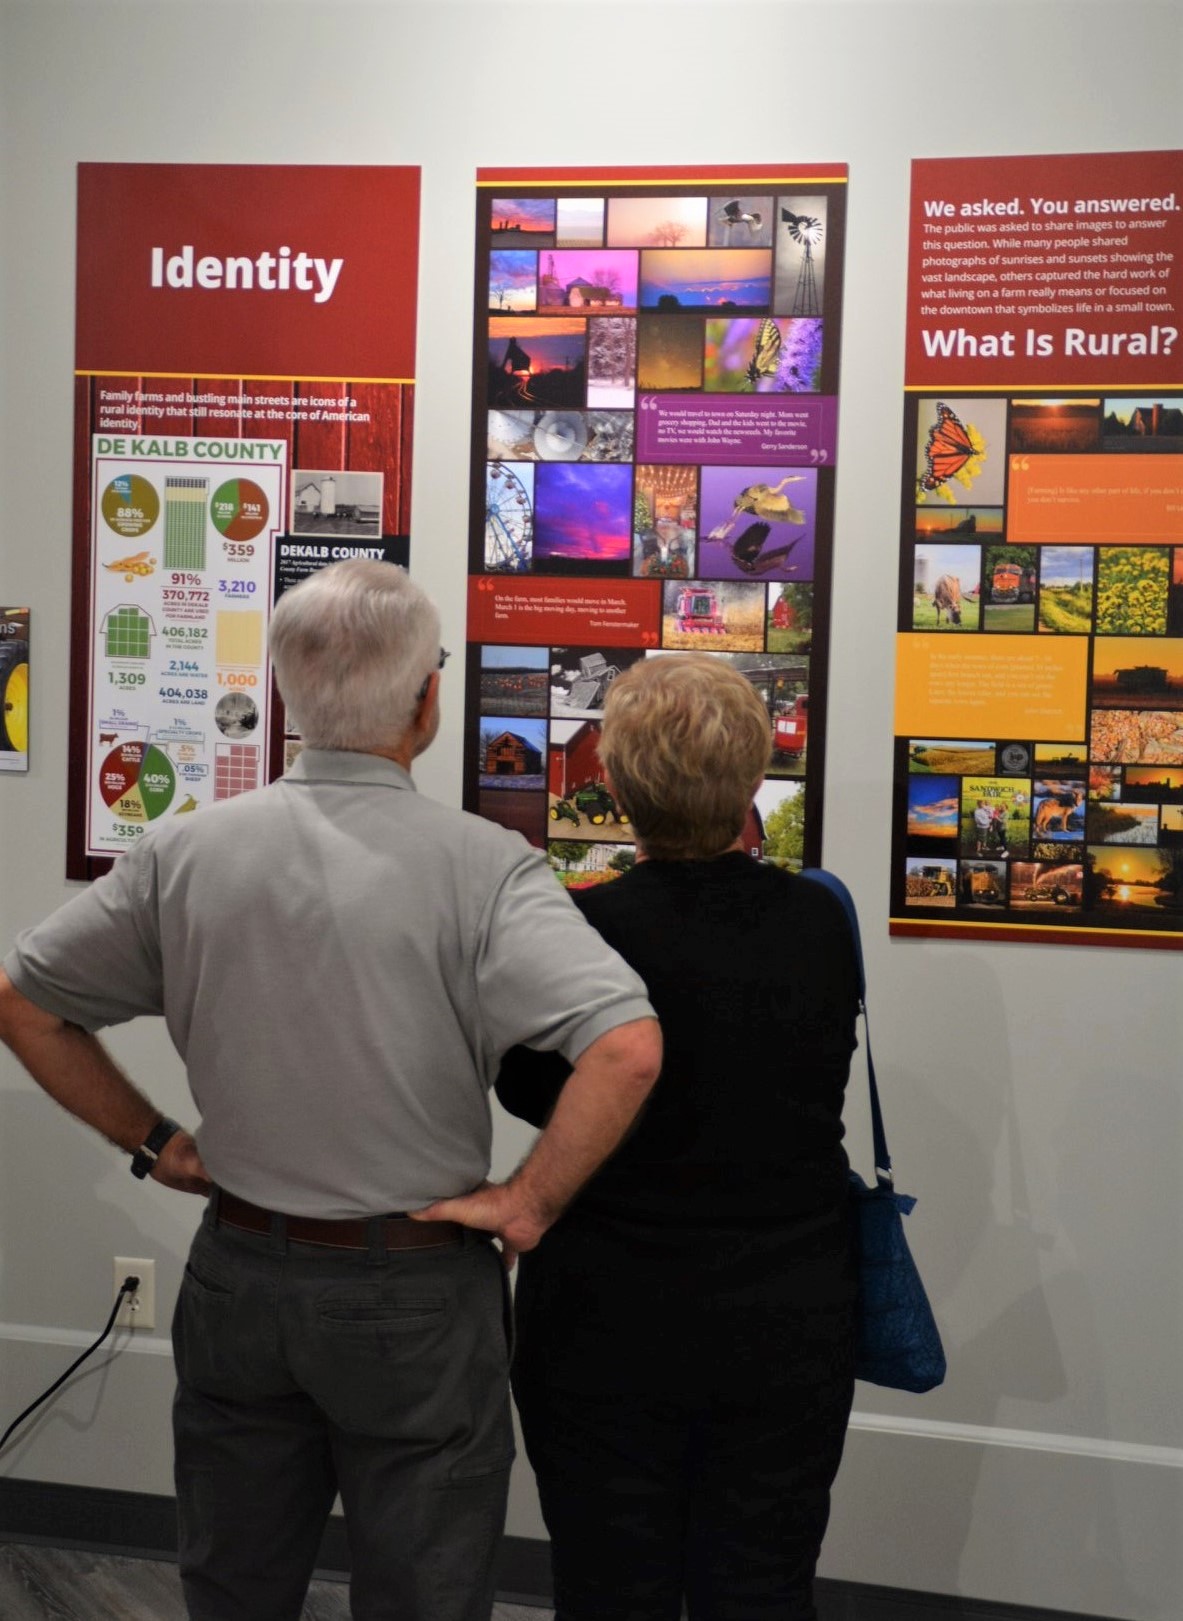 Photograph of visitors to DeKalb County History Center viewing the “Identity” section of the center’s Crossroads companion exhibition.